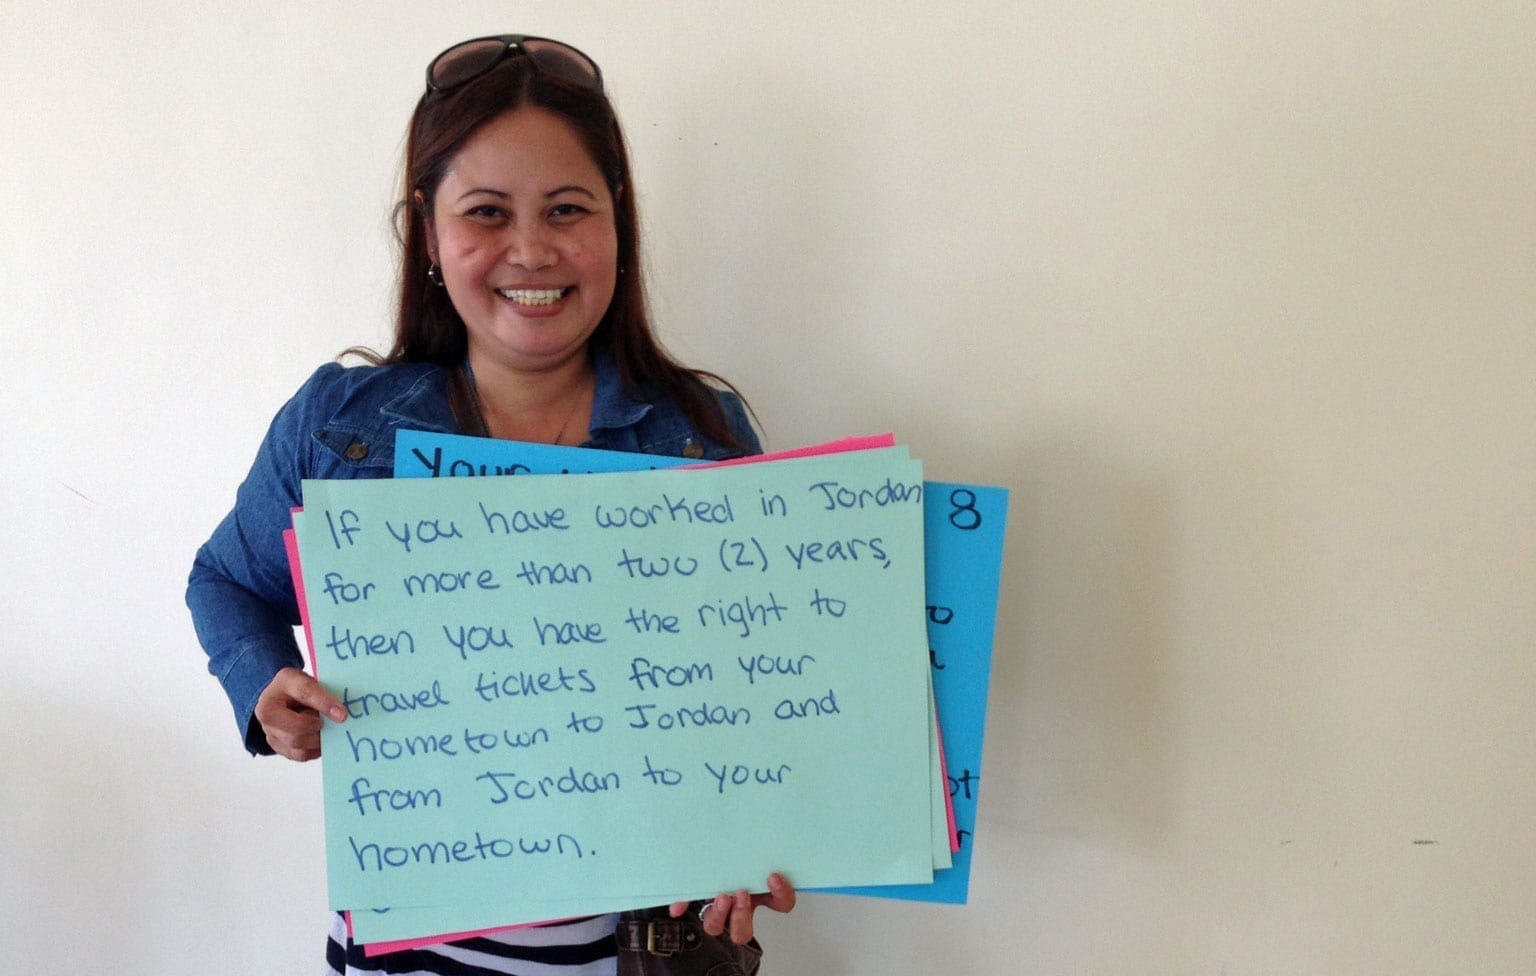 Filipina domestic worker participant, holding sign, if you have worked in Jordan for more than two years, then you have the right to travel tickets from your hometown to Jordan and from Jordan to your hometown